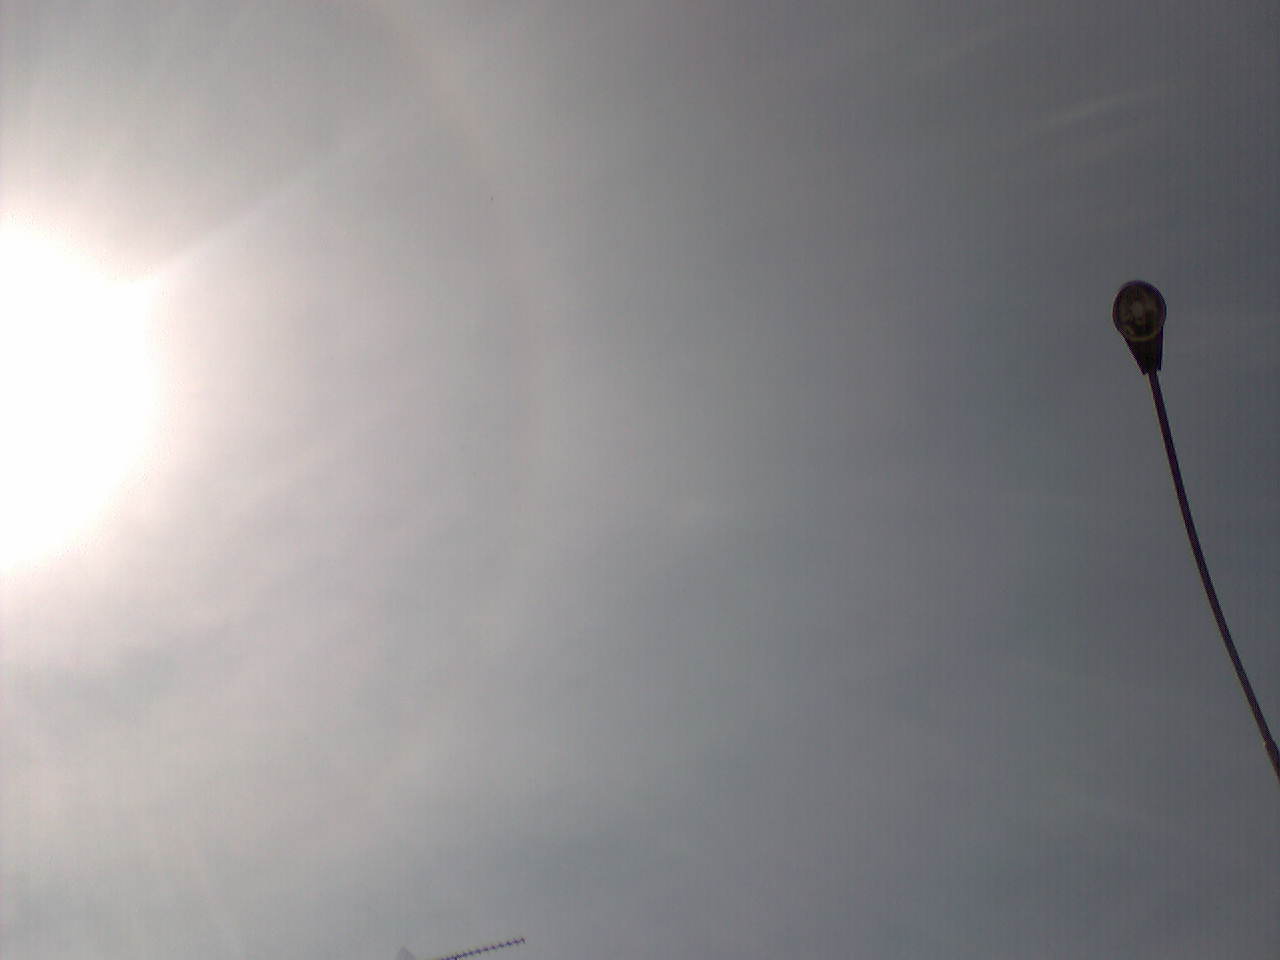 Solar circle with right sundog: 41 KB; click on the image to enlarge